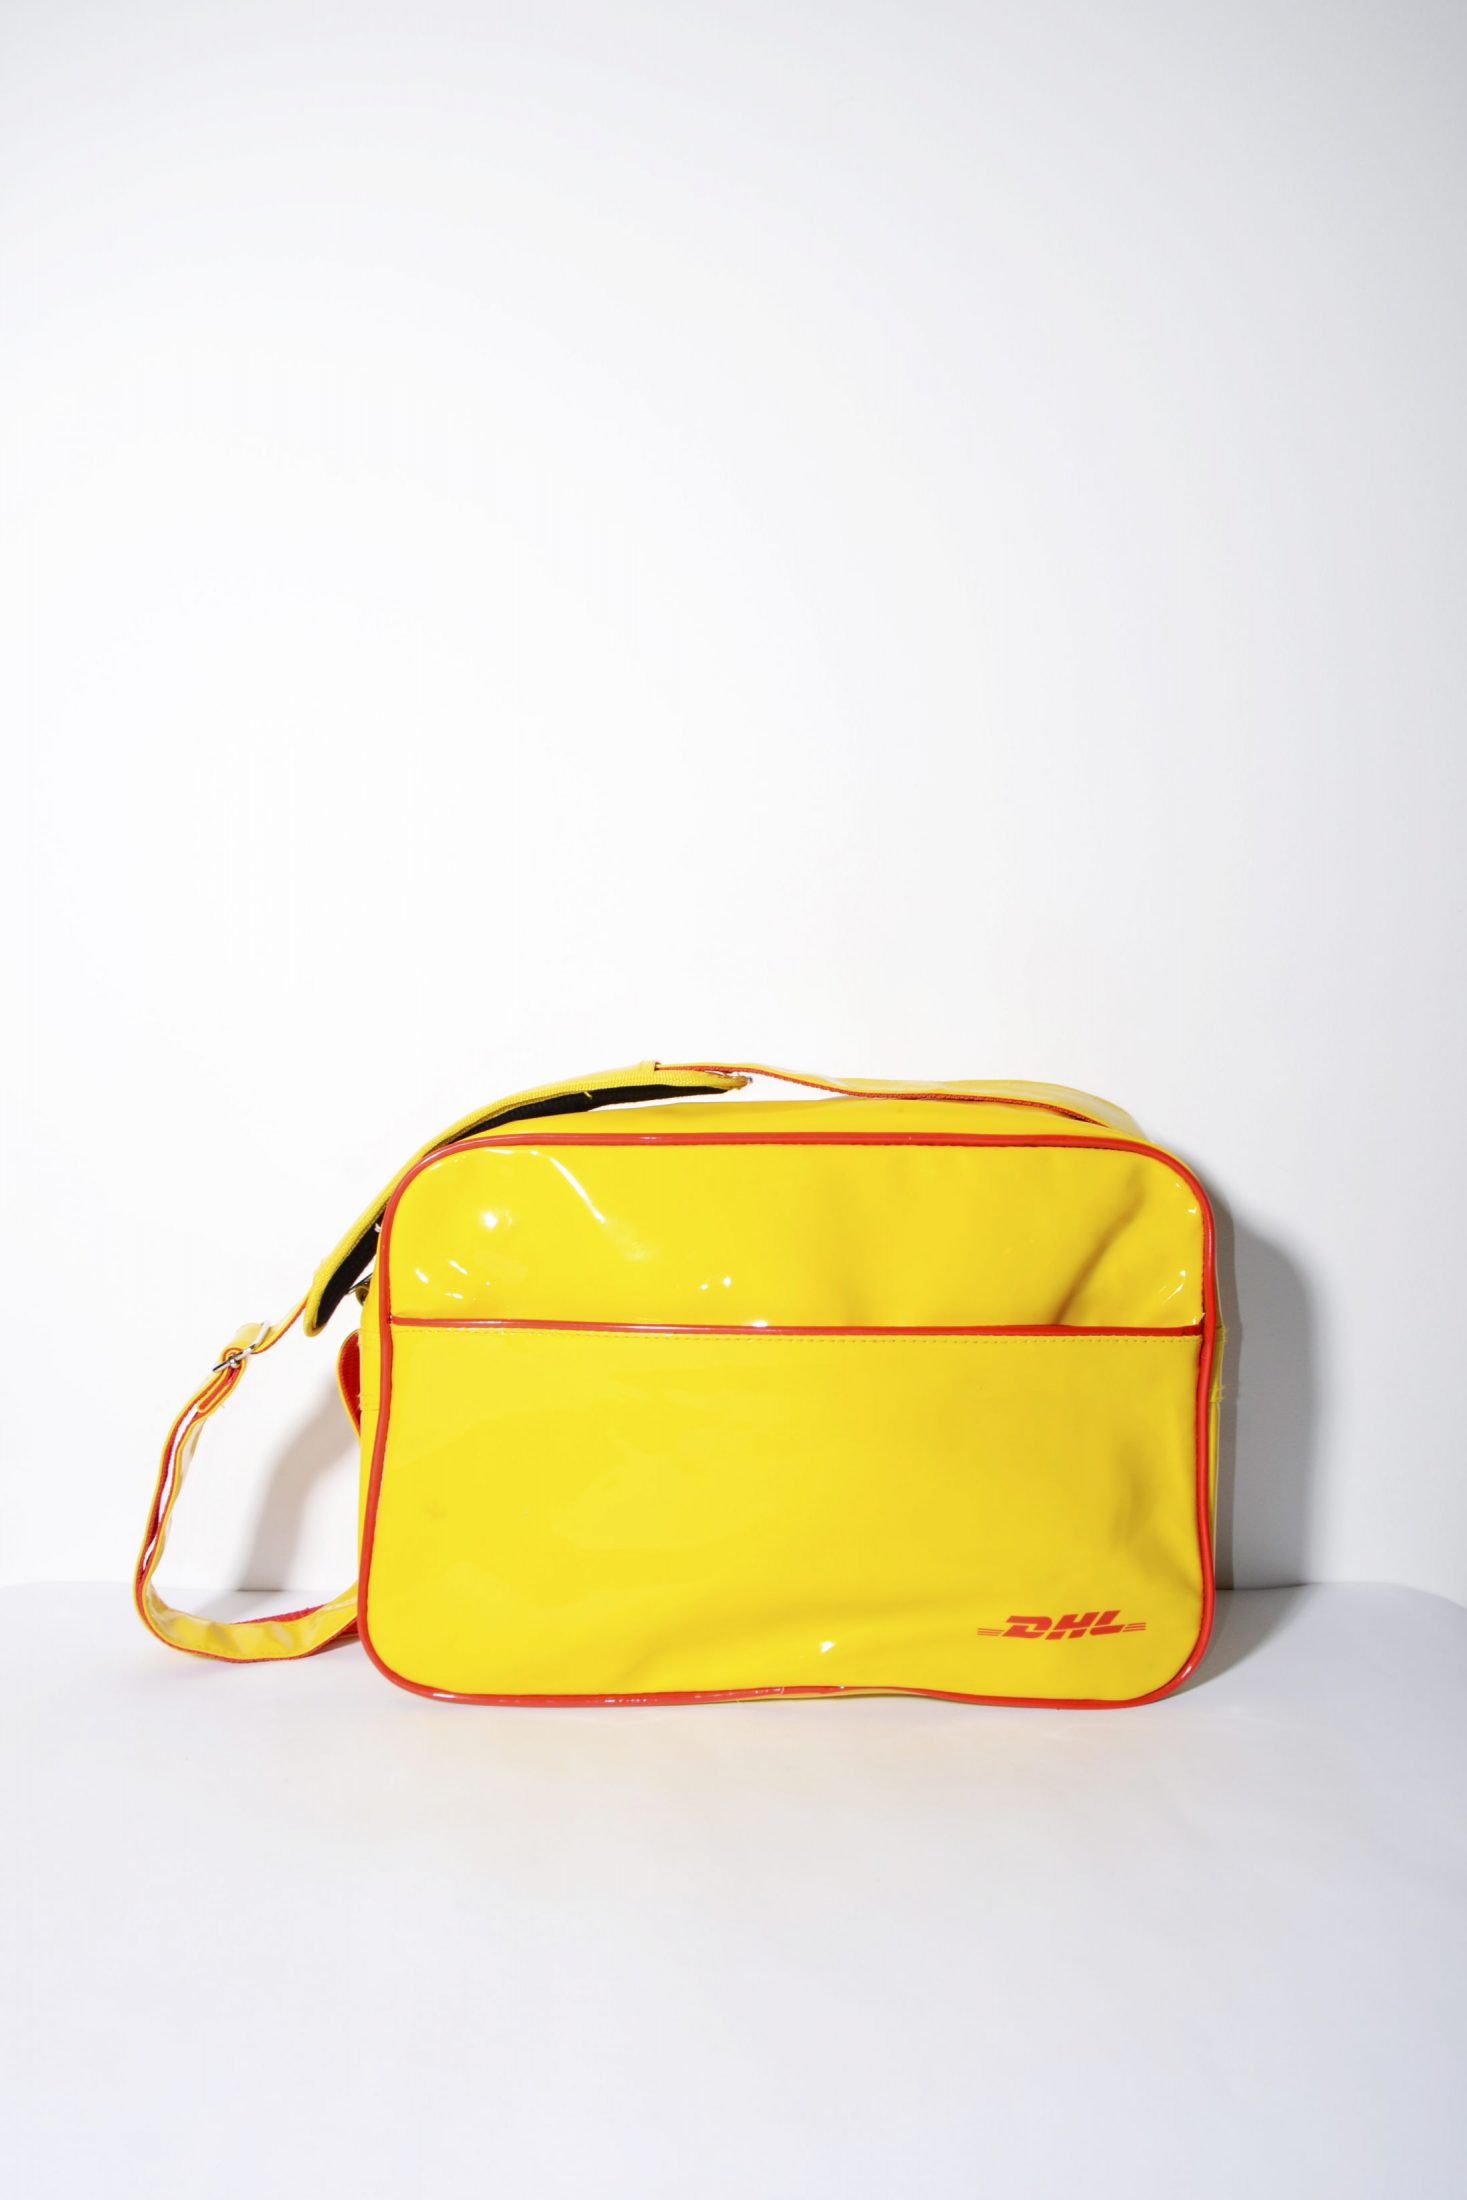 DHL courier bag | Vintage crossbody men's yellow bag from HOT MILK